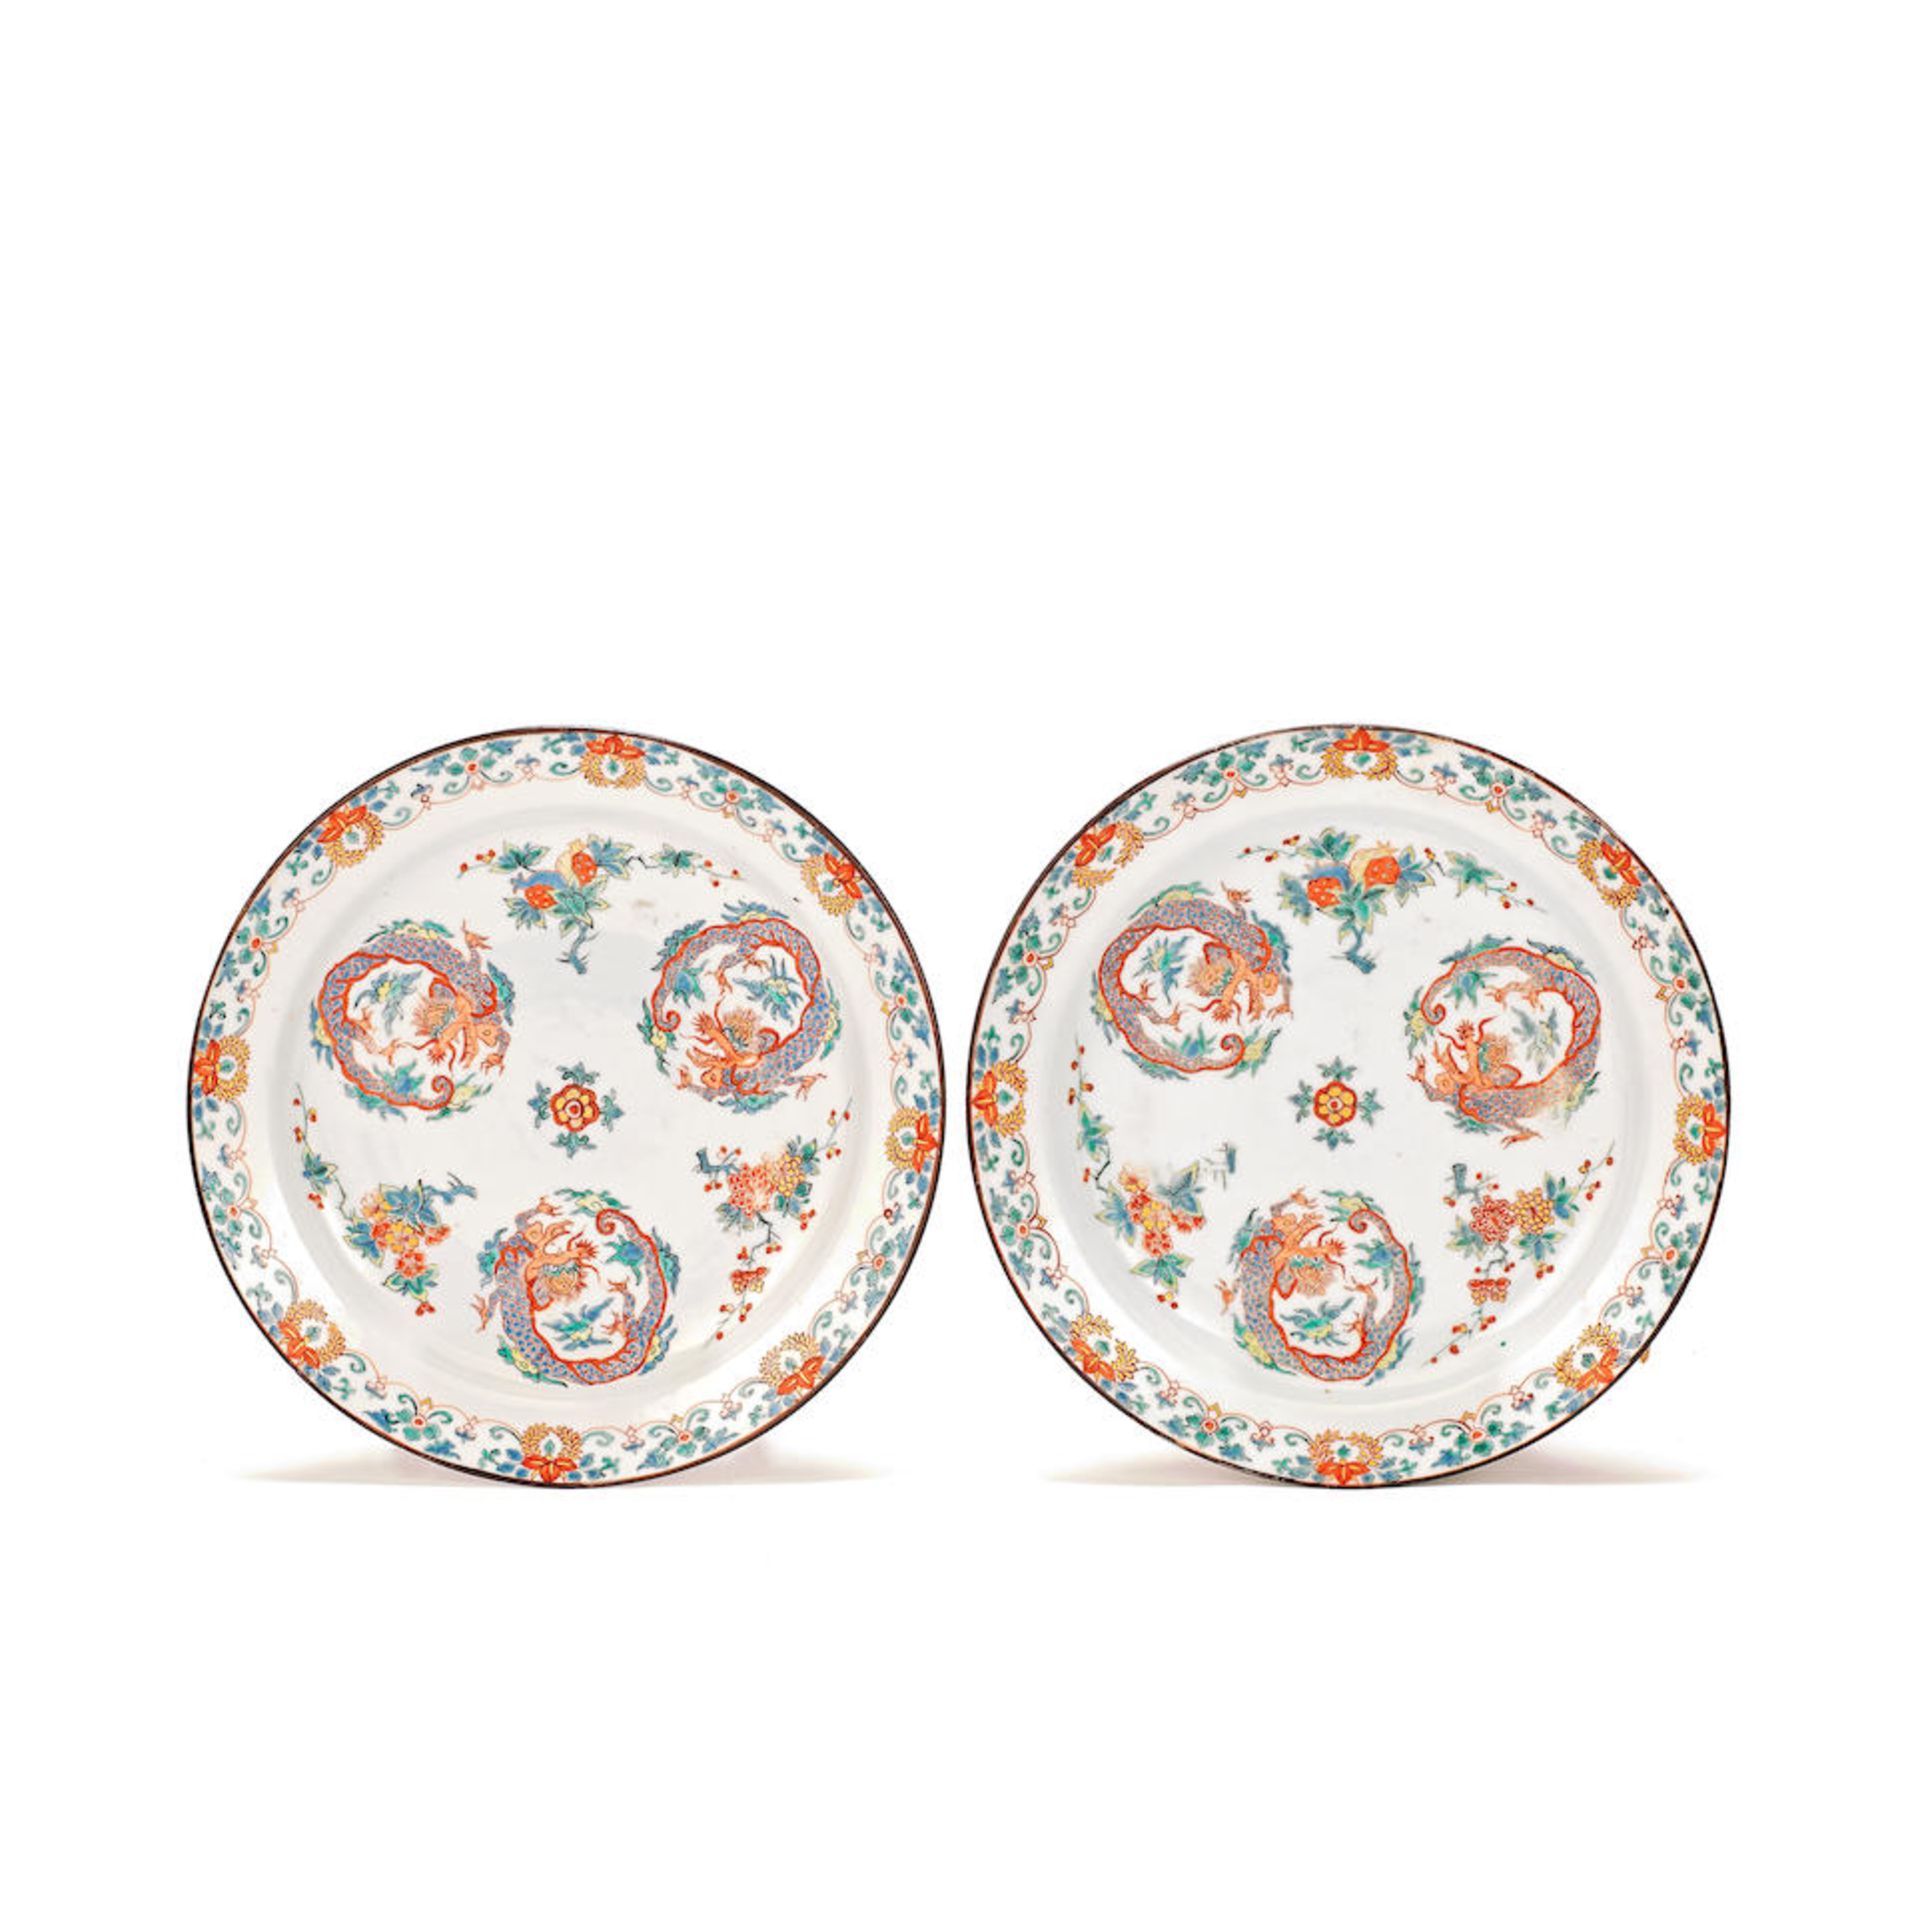 A PAIR OF DUTCH-DECORATED KAKIEMON-STYLE DISHES 18th century (2)